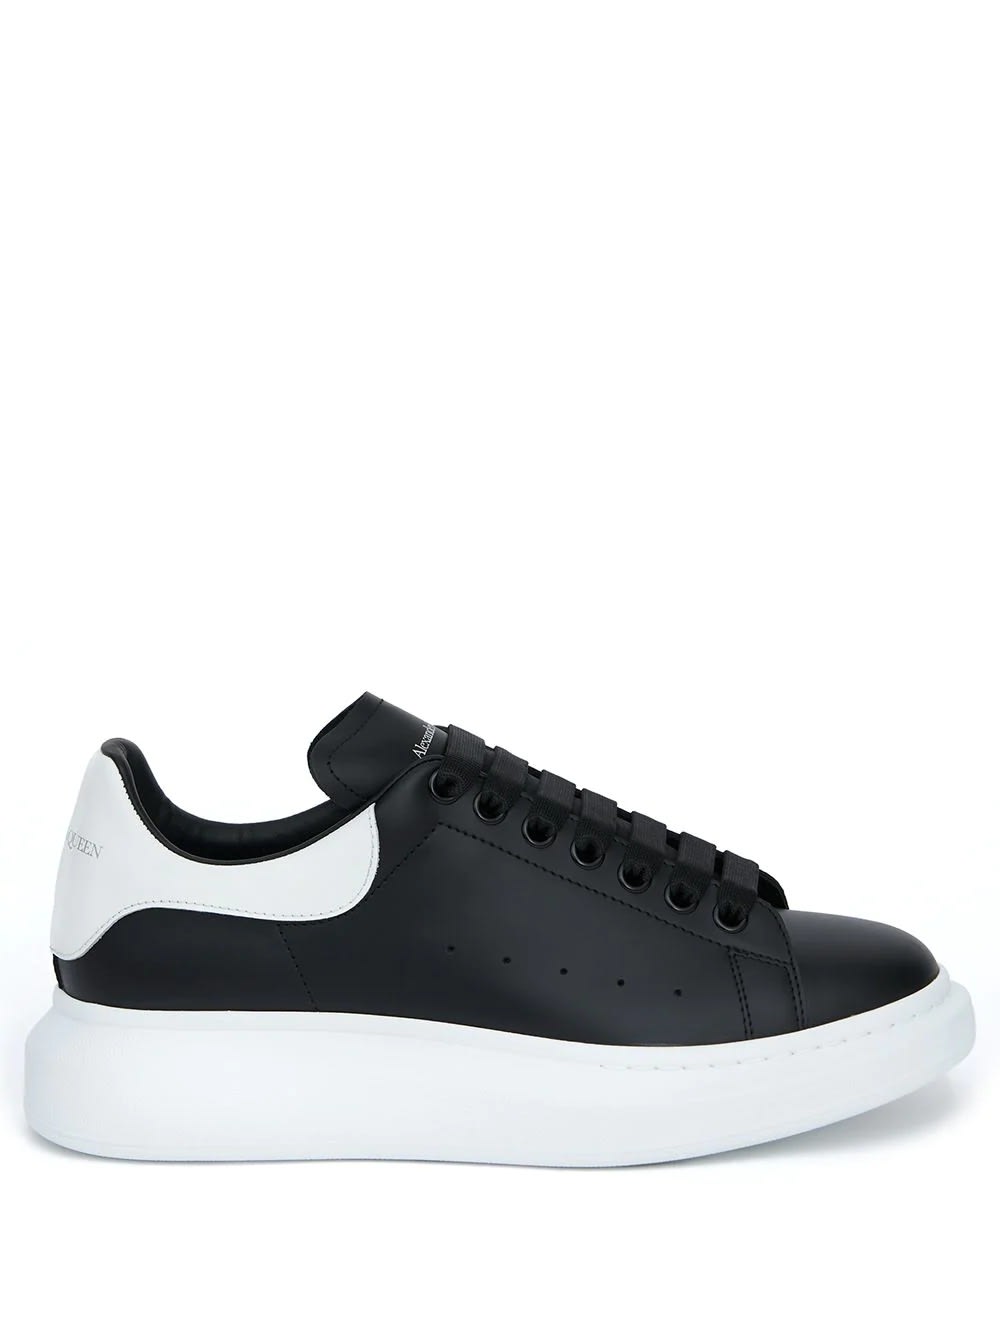 Alexander Mcqueen Black And White Oversized Sneakers